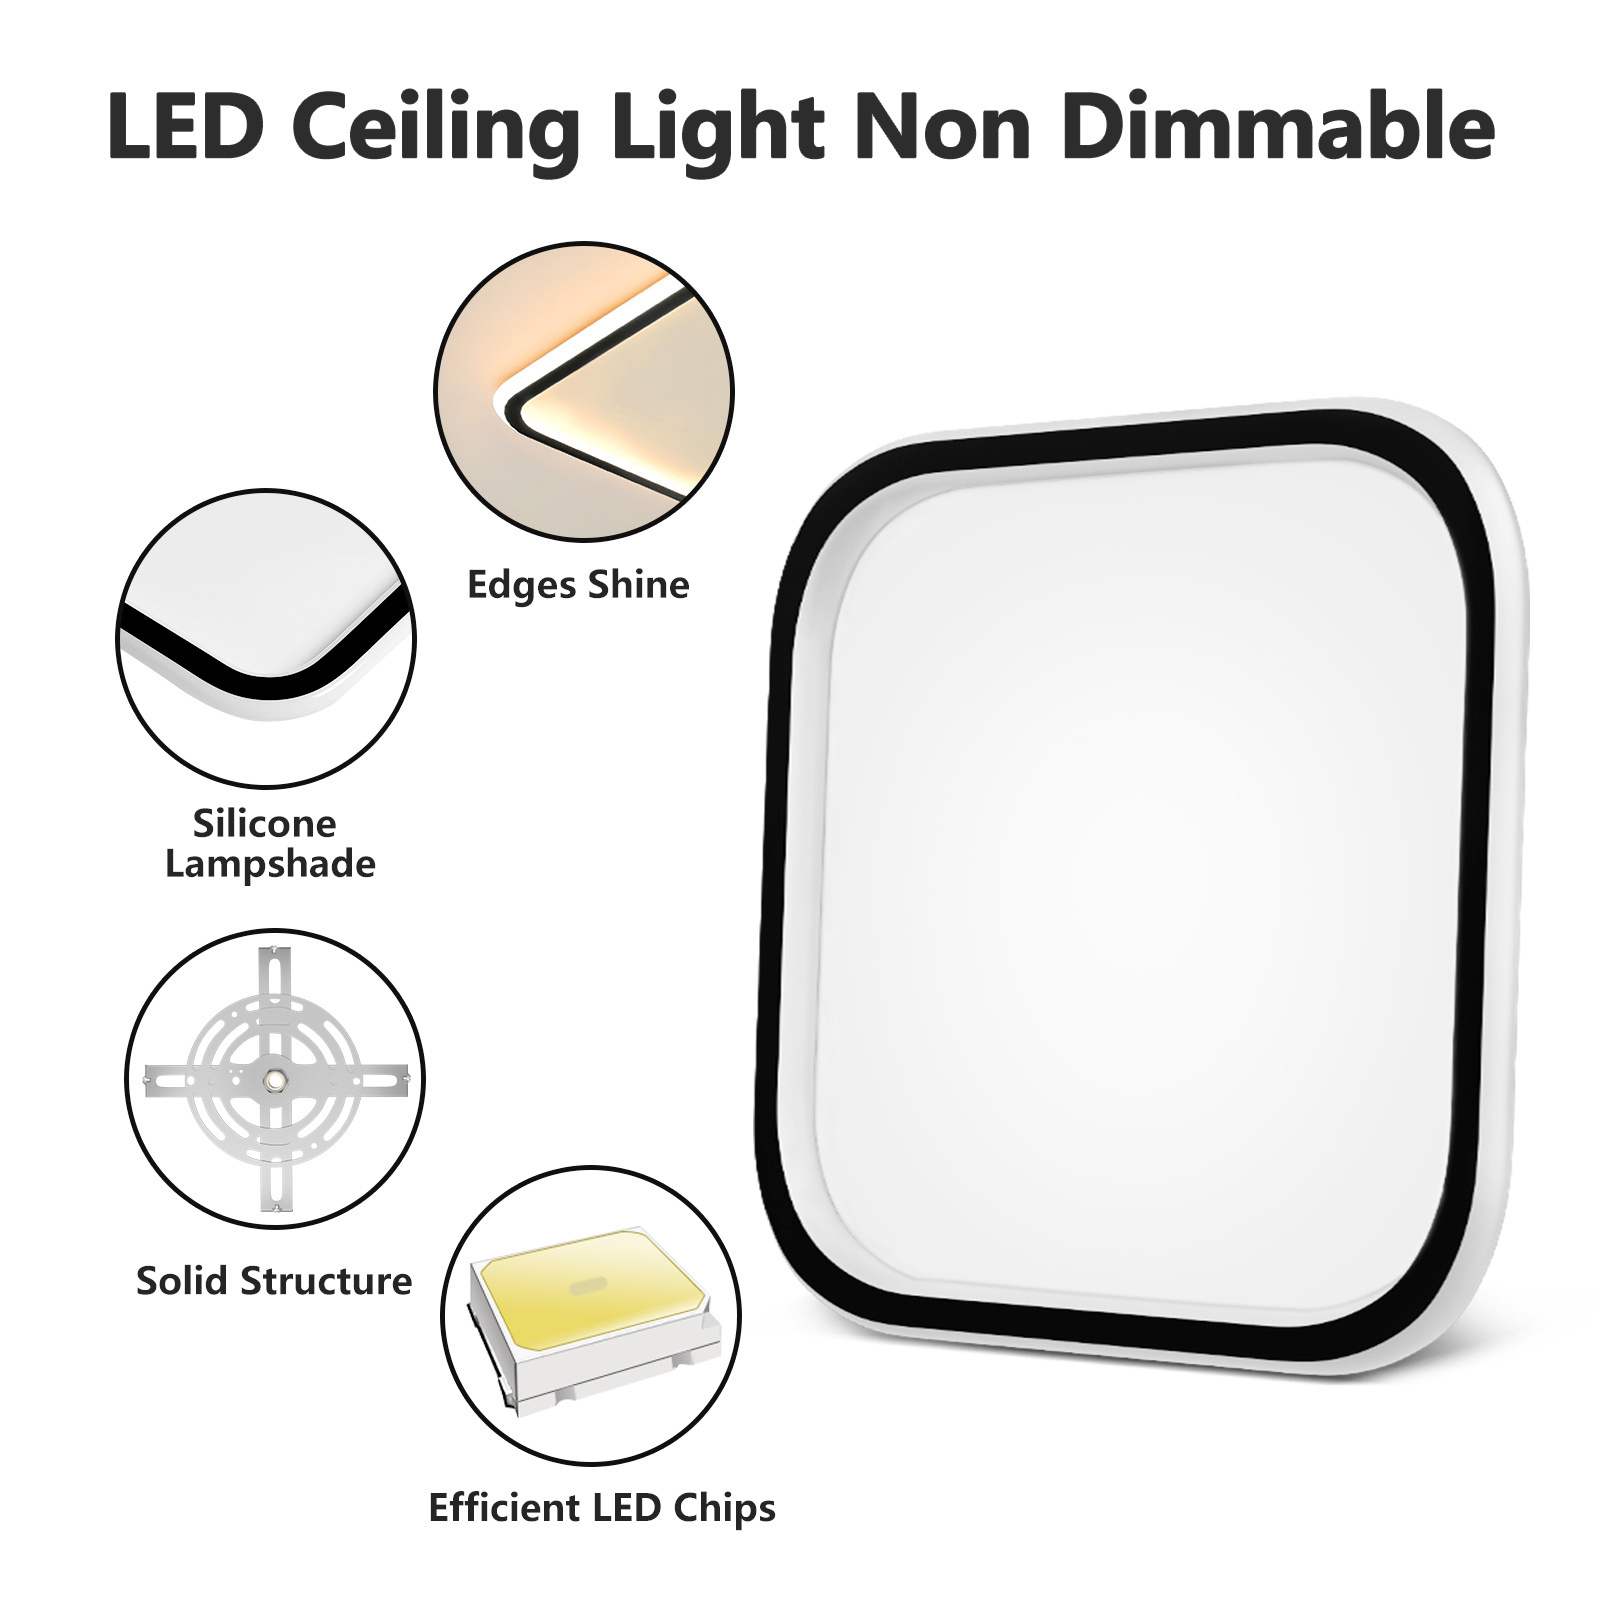 CHEEROLL LED Flush Mount Ceiling Light Fixture, 45W LED Ceiling Light Flush Mount, 12 inch 3000K Warm Light Flush Mount Light for Bathroom, Kitchen, Bedroom, Living Room, Garage Non Dimmable